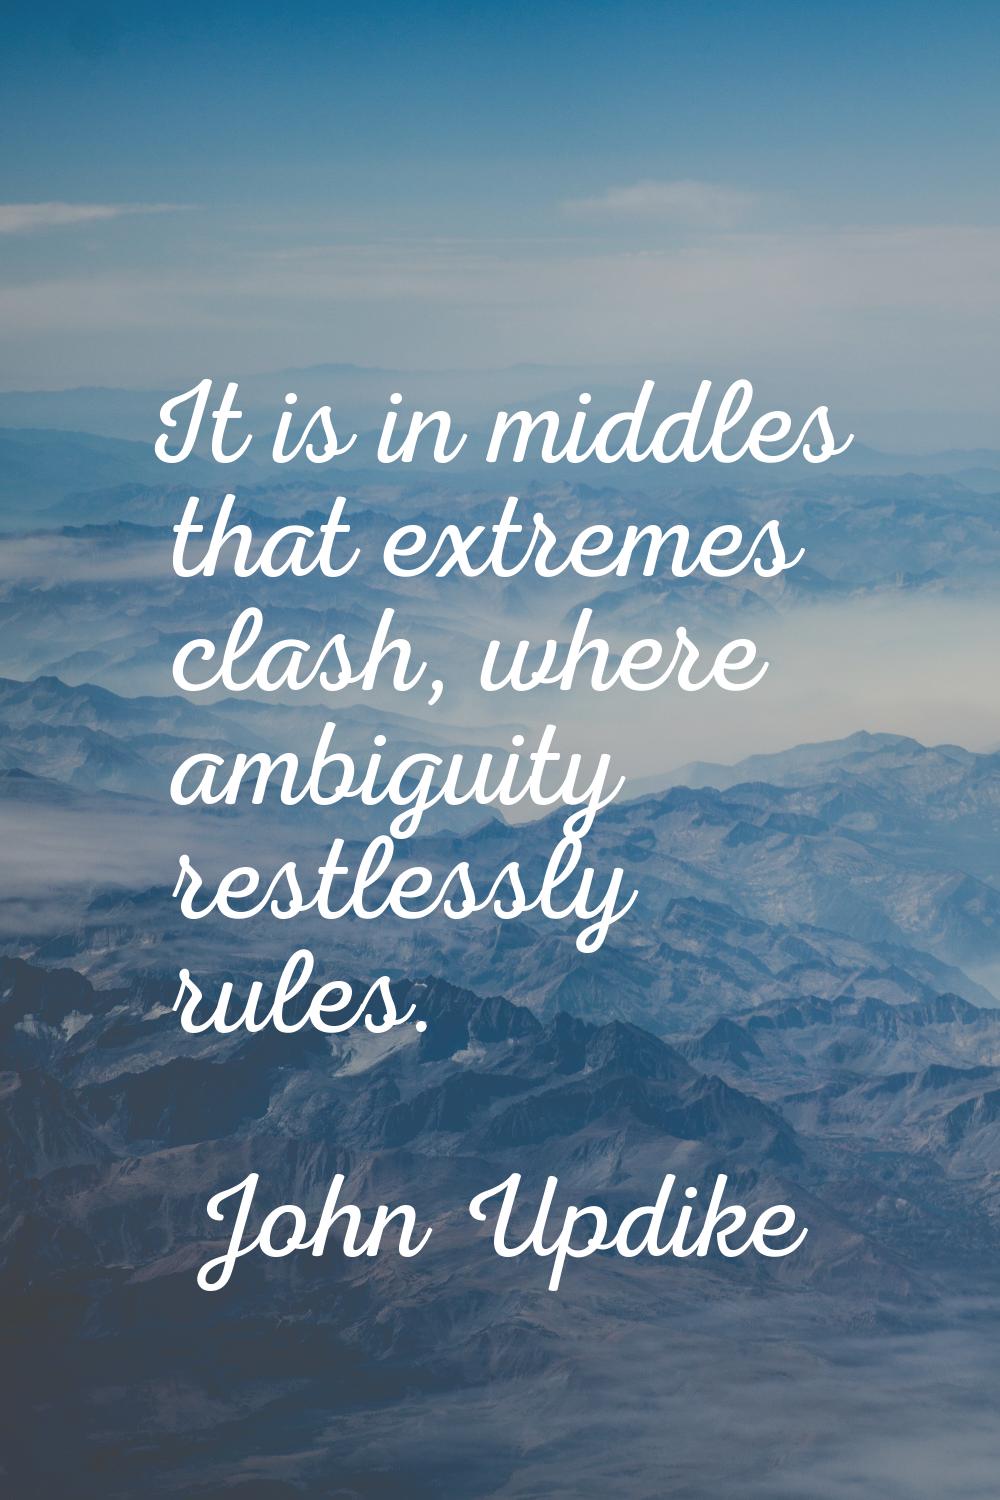 It is in middles that extremes clash, where ambiguity restlessly rules.